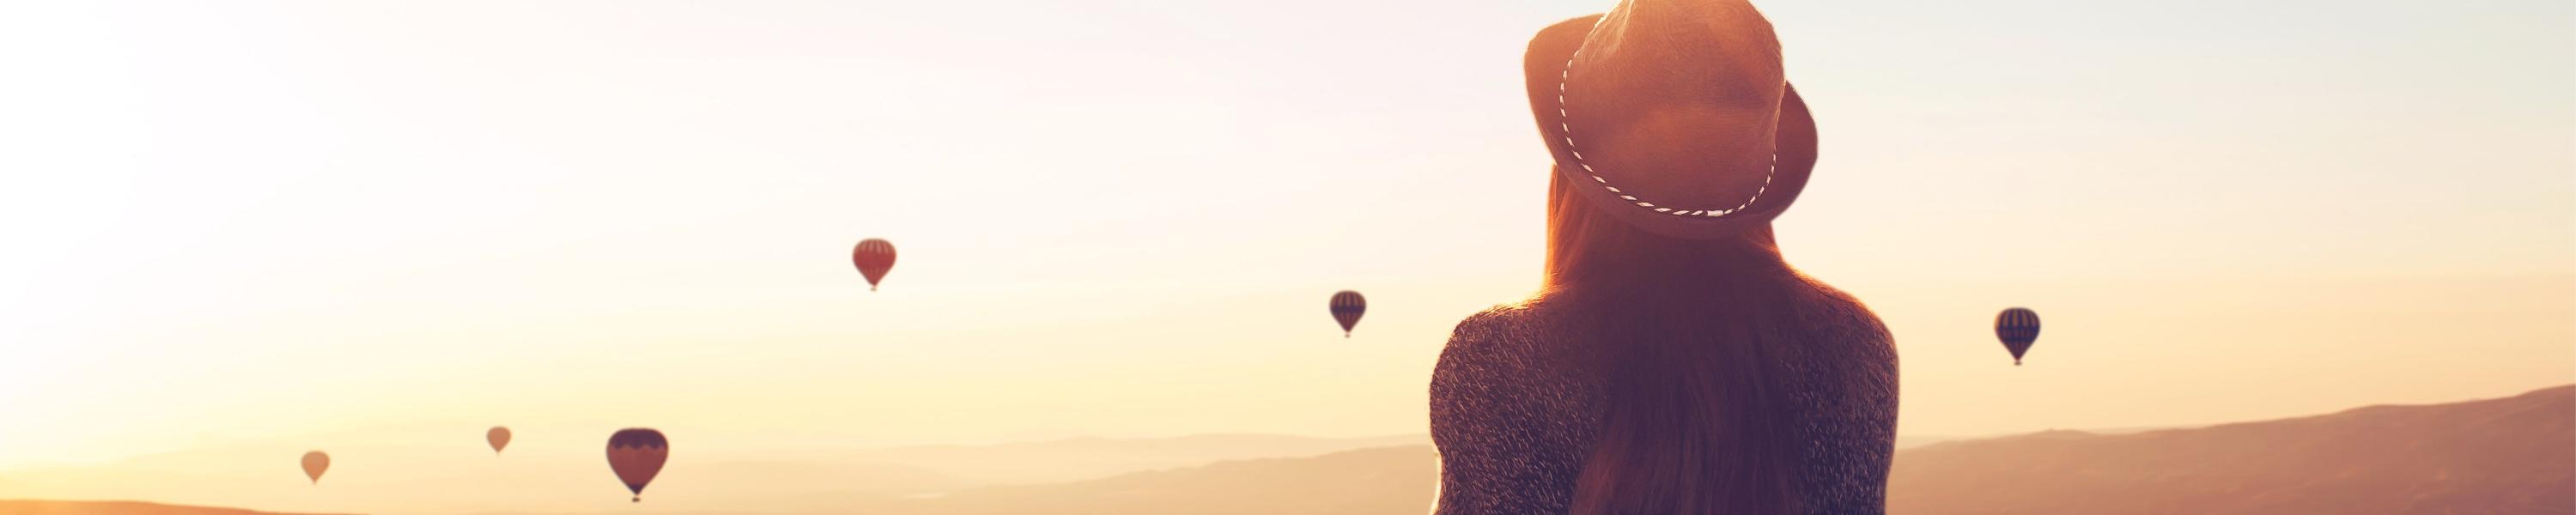 girl sitting on a hill and looking at air balloons